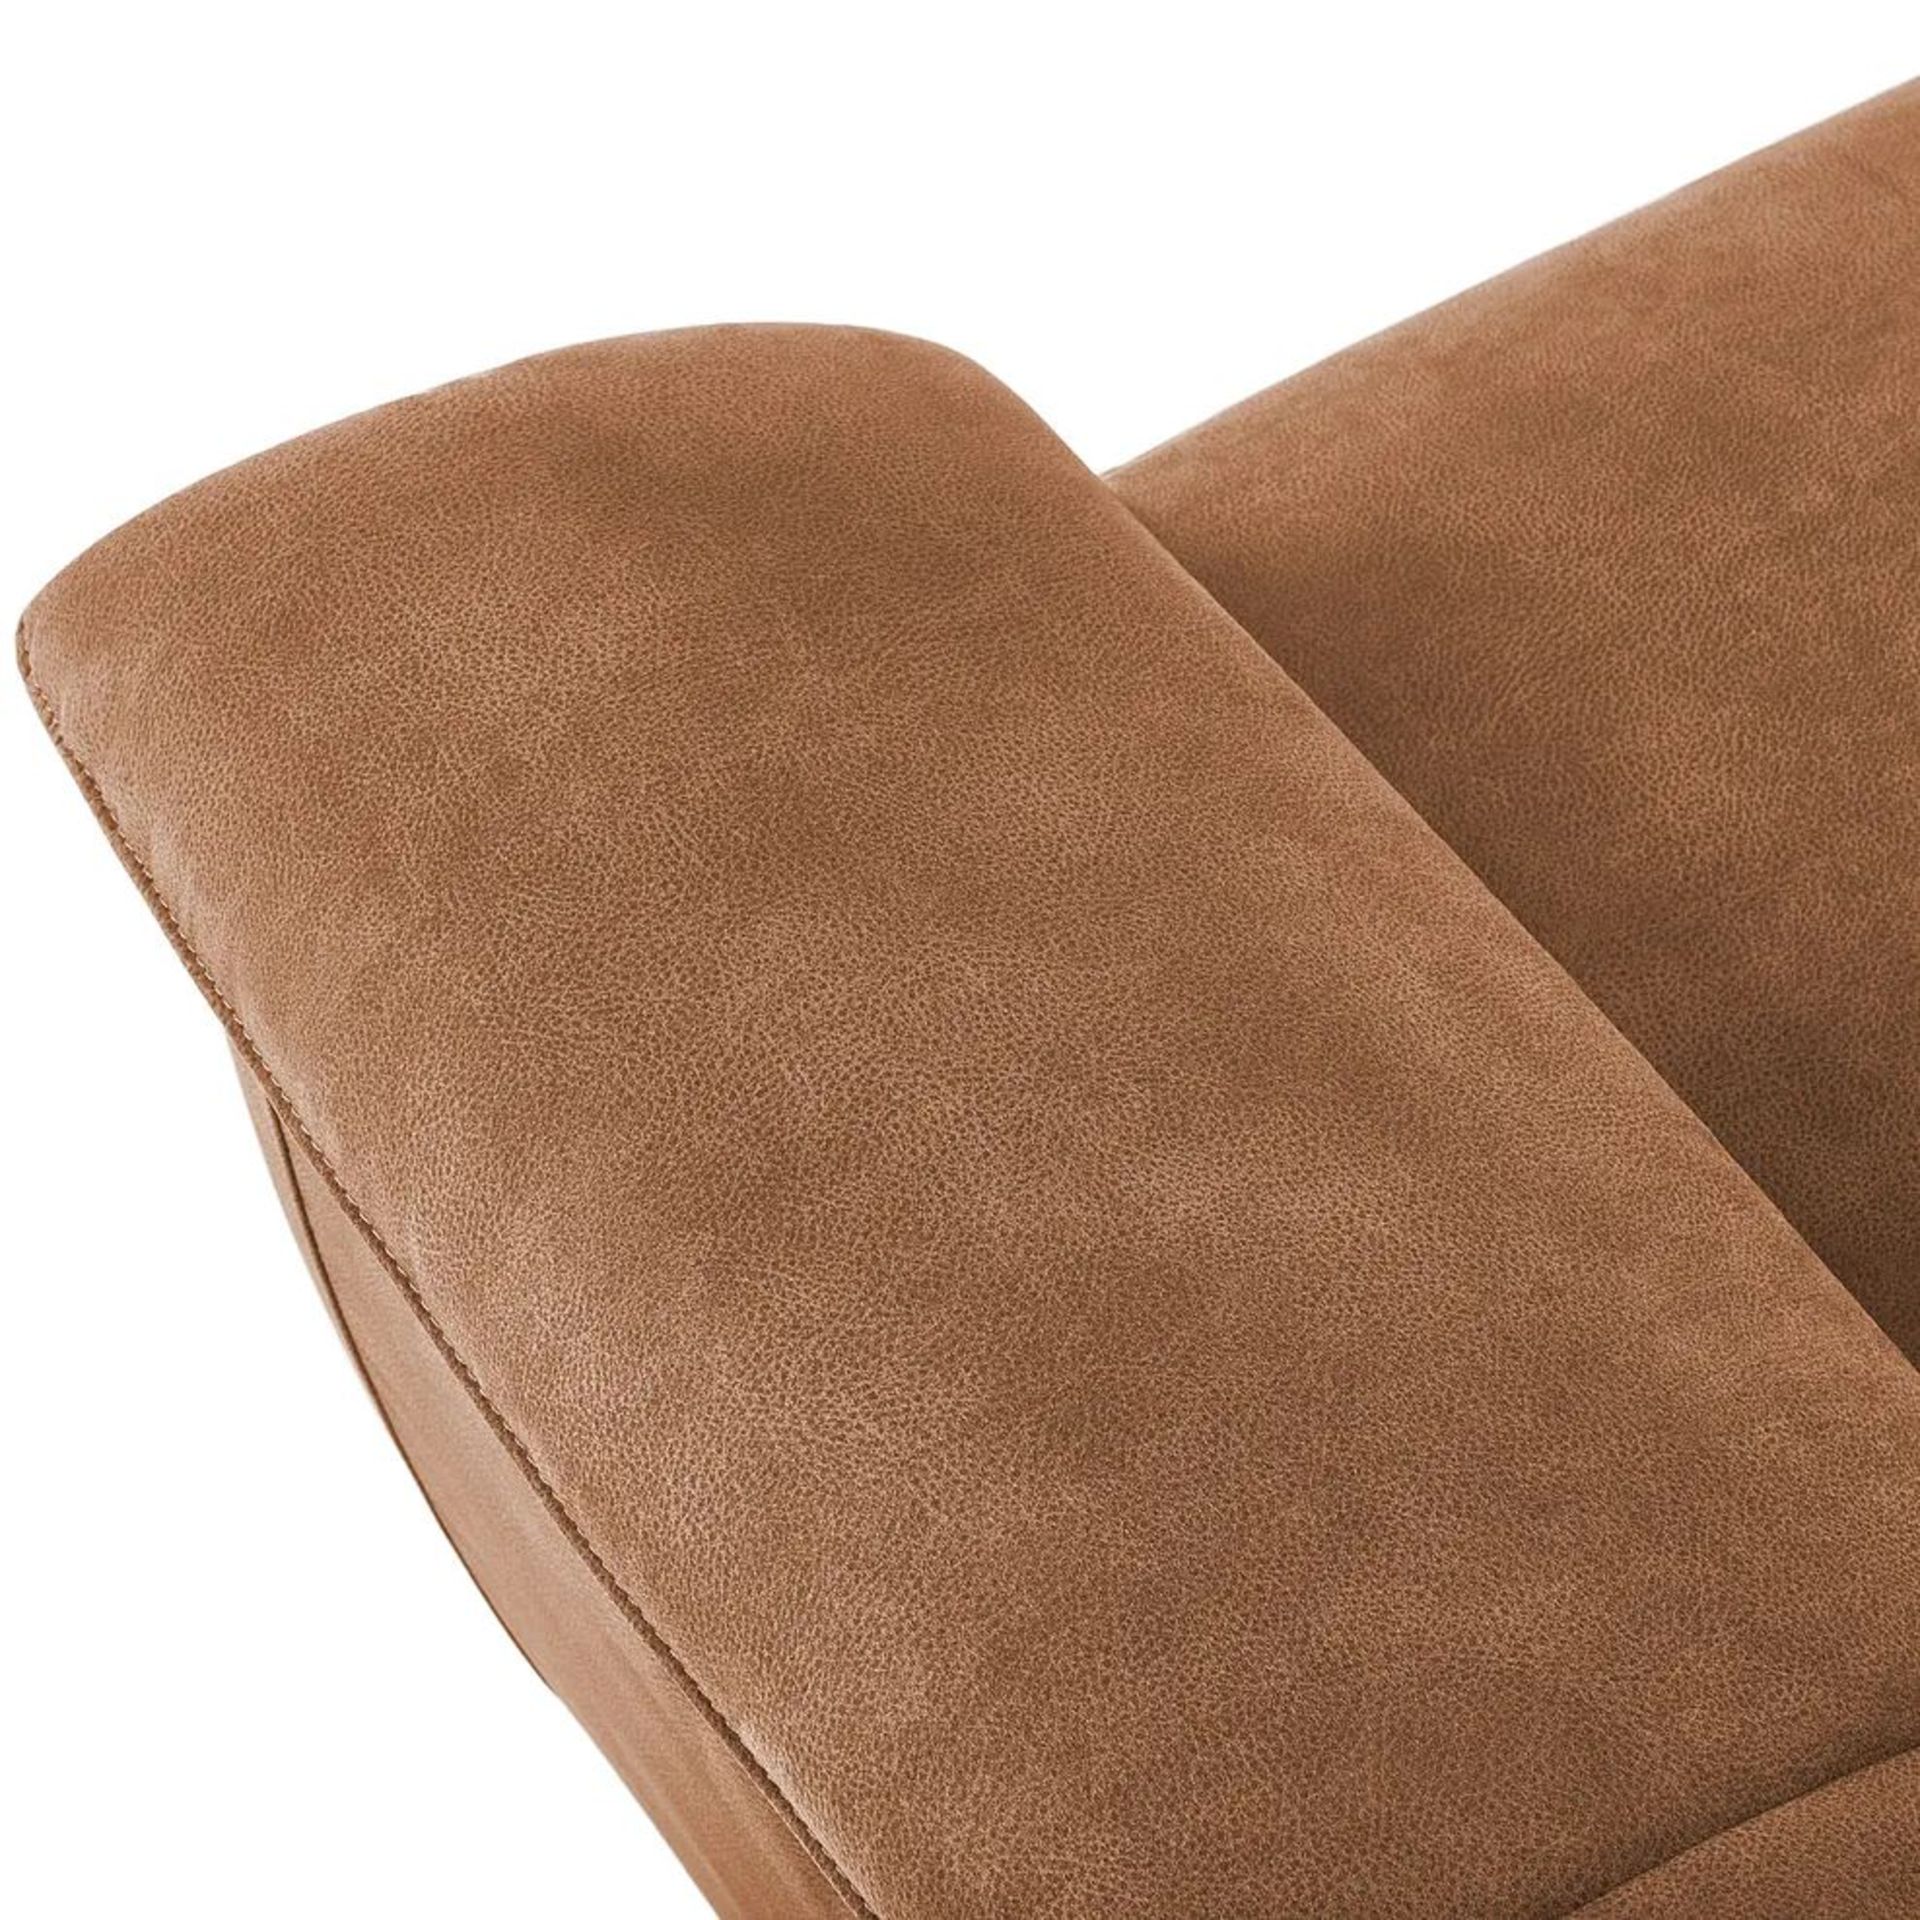 BRAND NEW CARTER 3 Seater Electric Recliner Sofa - BROWN FABRIC. RRP £1299. Shown here in Ranch - Image 10 of 12